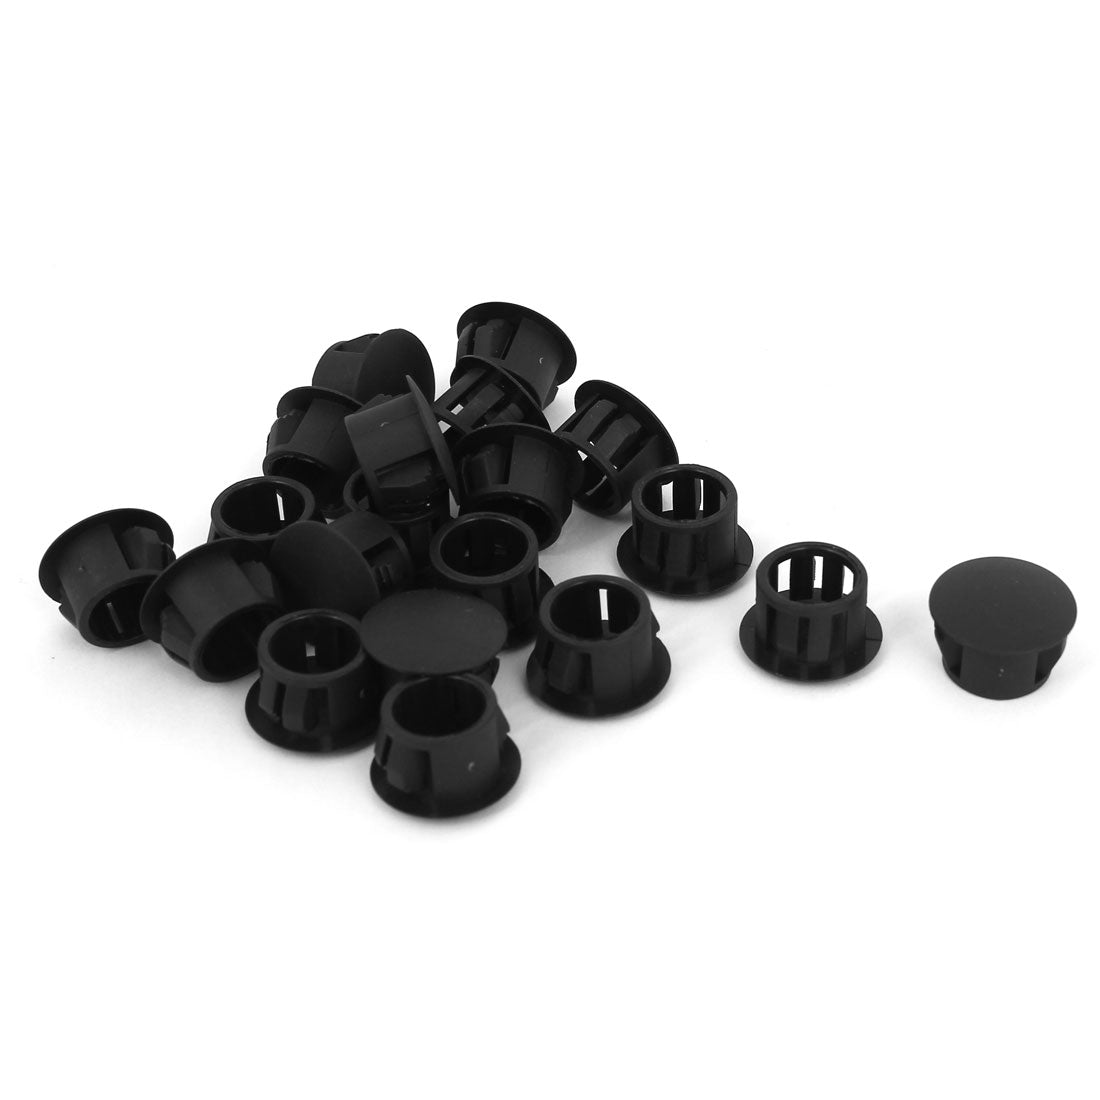 uxcell Uxcell Black Plastic Round Snap in Mounting 1/2" Panel Hole Cover 20pcs